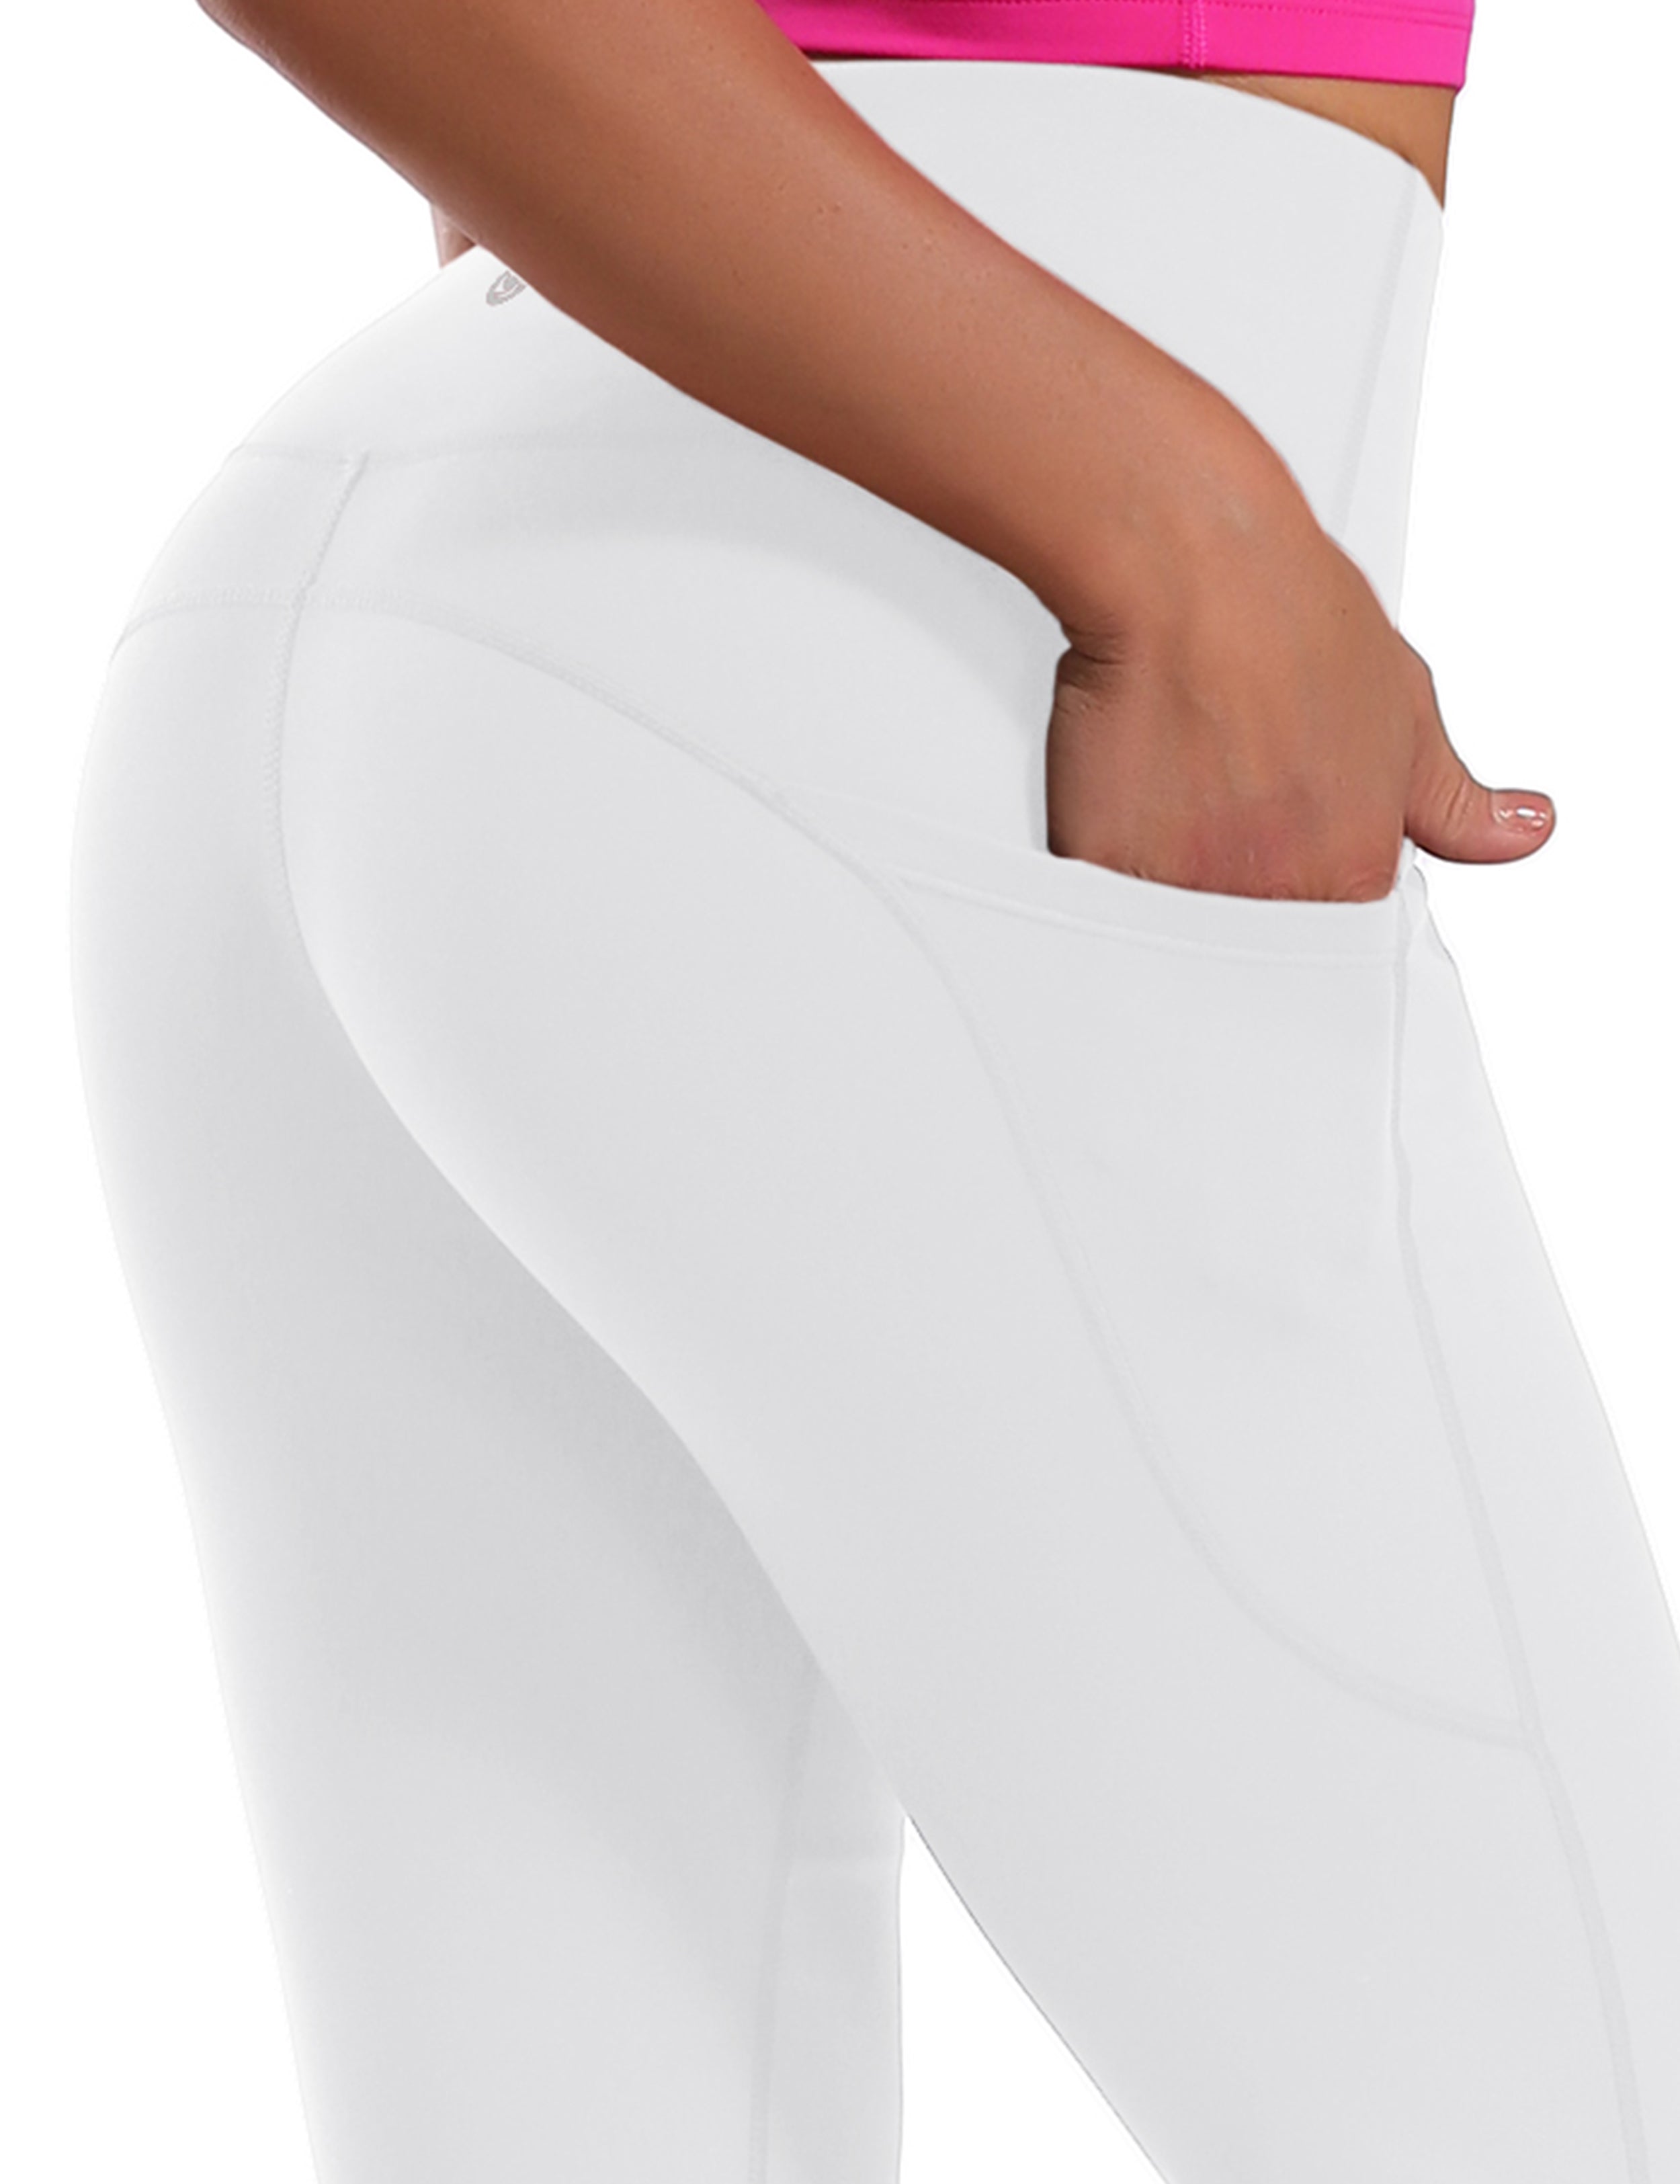 139 Side Pockets Bootcut Leggings white 87%Nylon/13%Spandex Fabric doesn't attract lint easily 4-way stretch No see-through Moisture-wicking Tummy control Inner pocket Four lengths